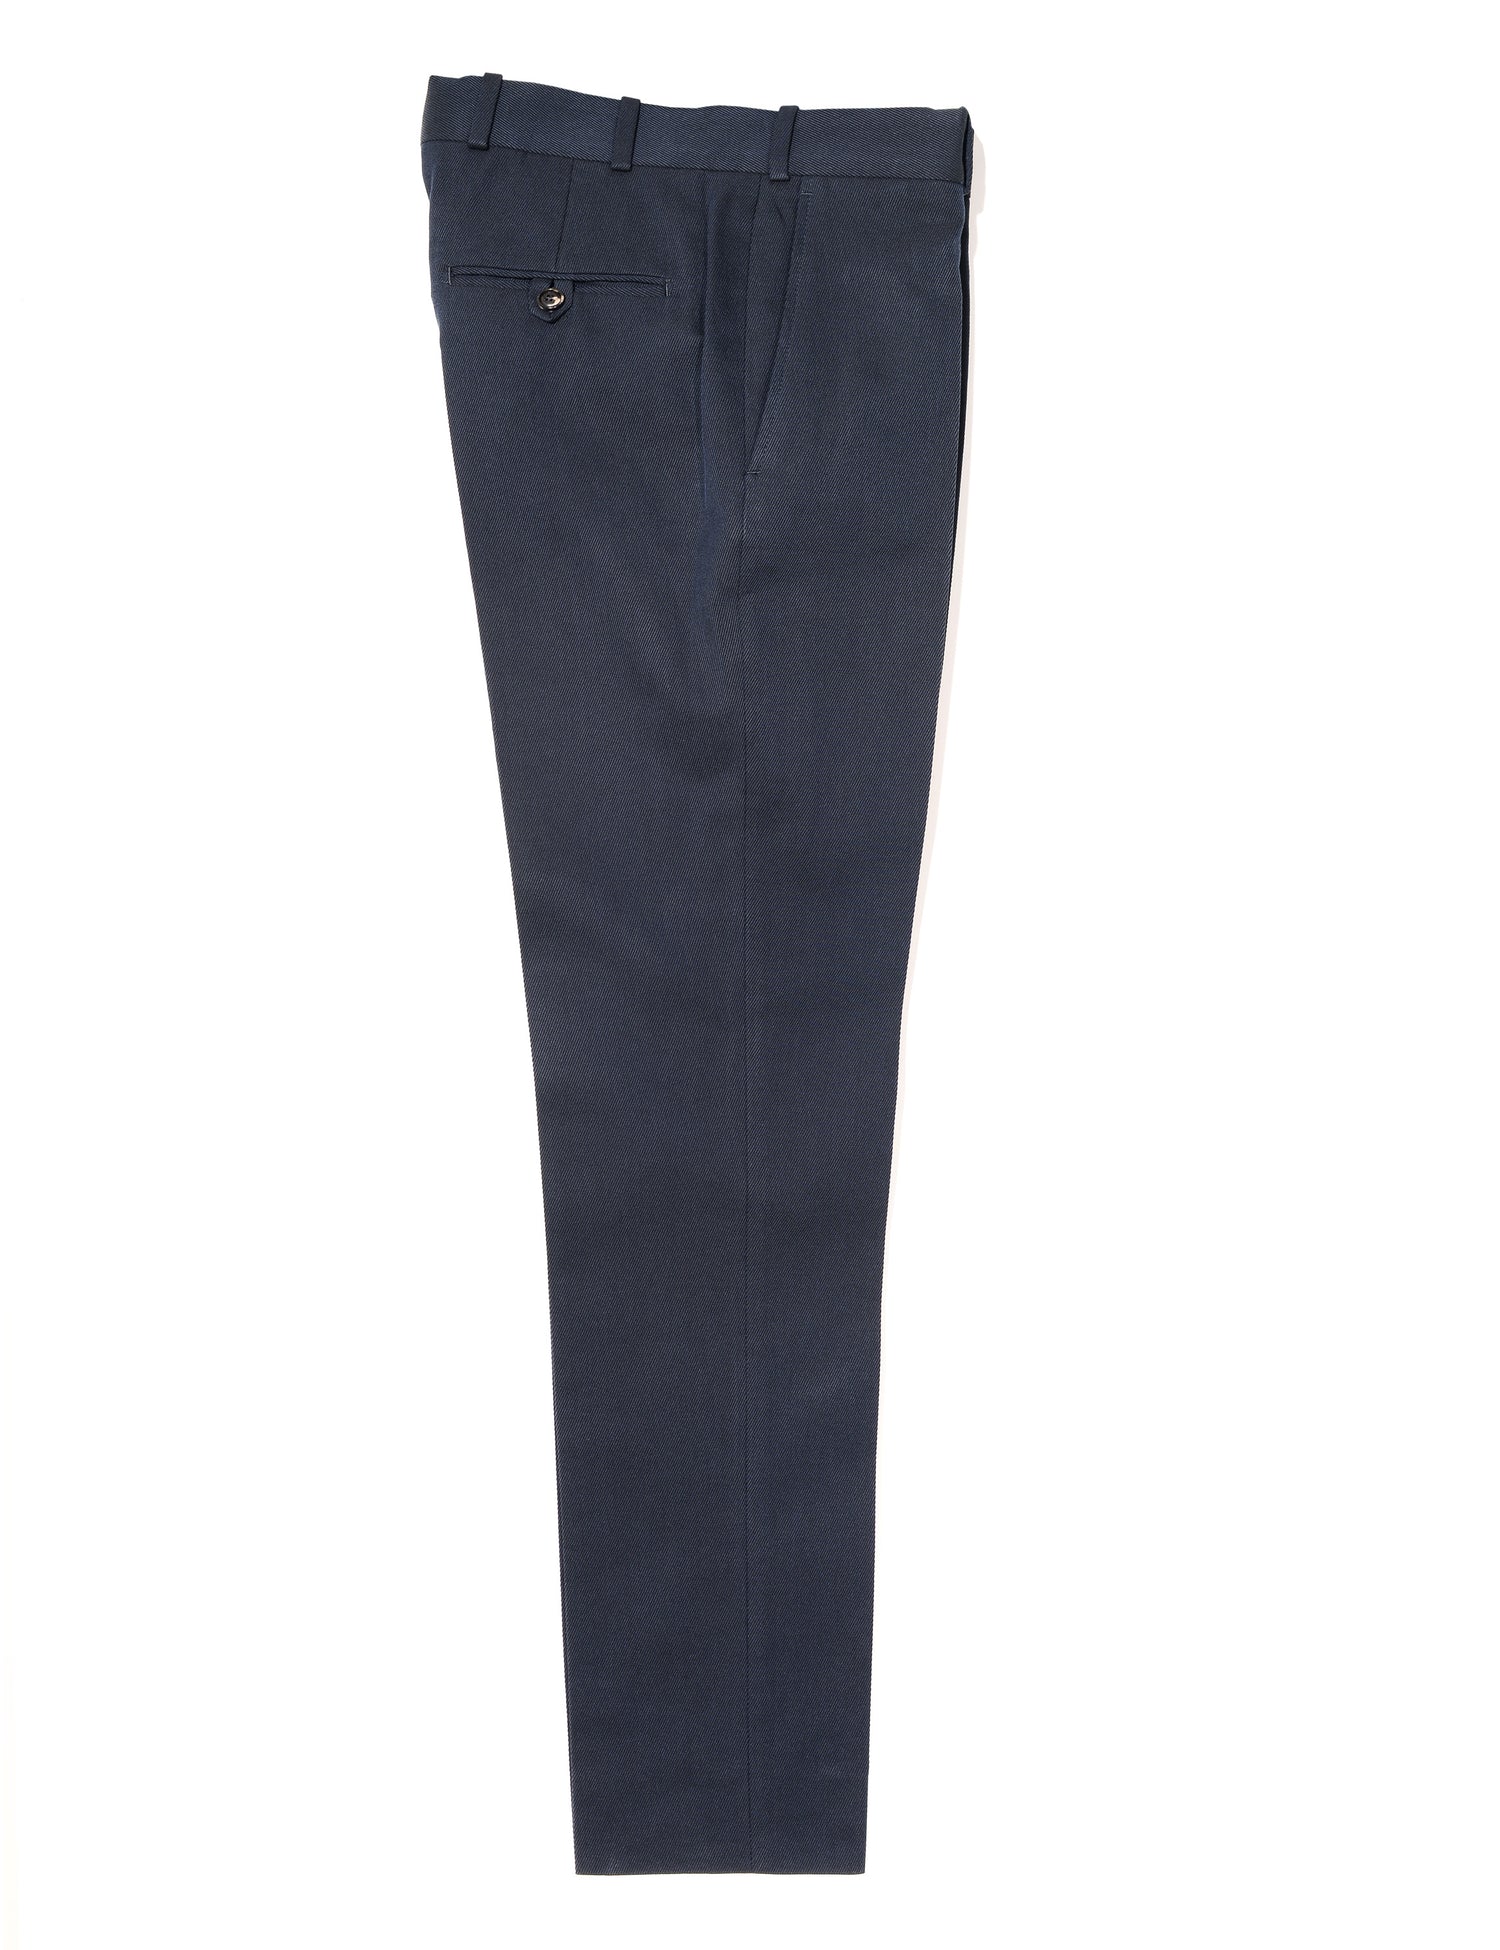 Brooklyn Tailors BKT50 Tailored Trousers in Cavalry Twill - Navy full length flat shot